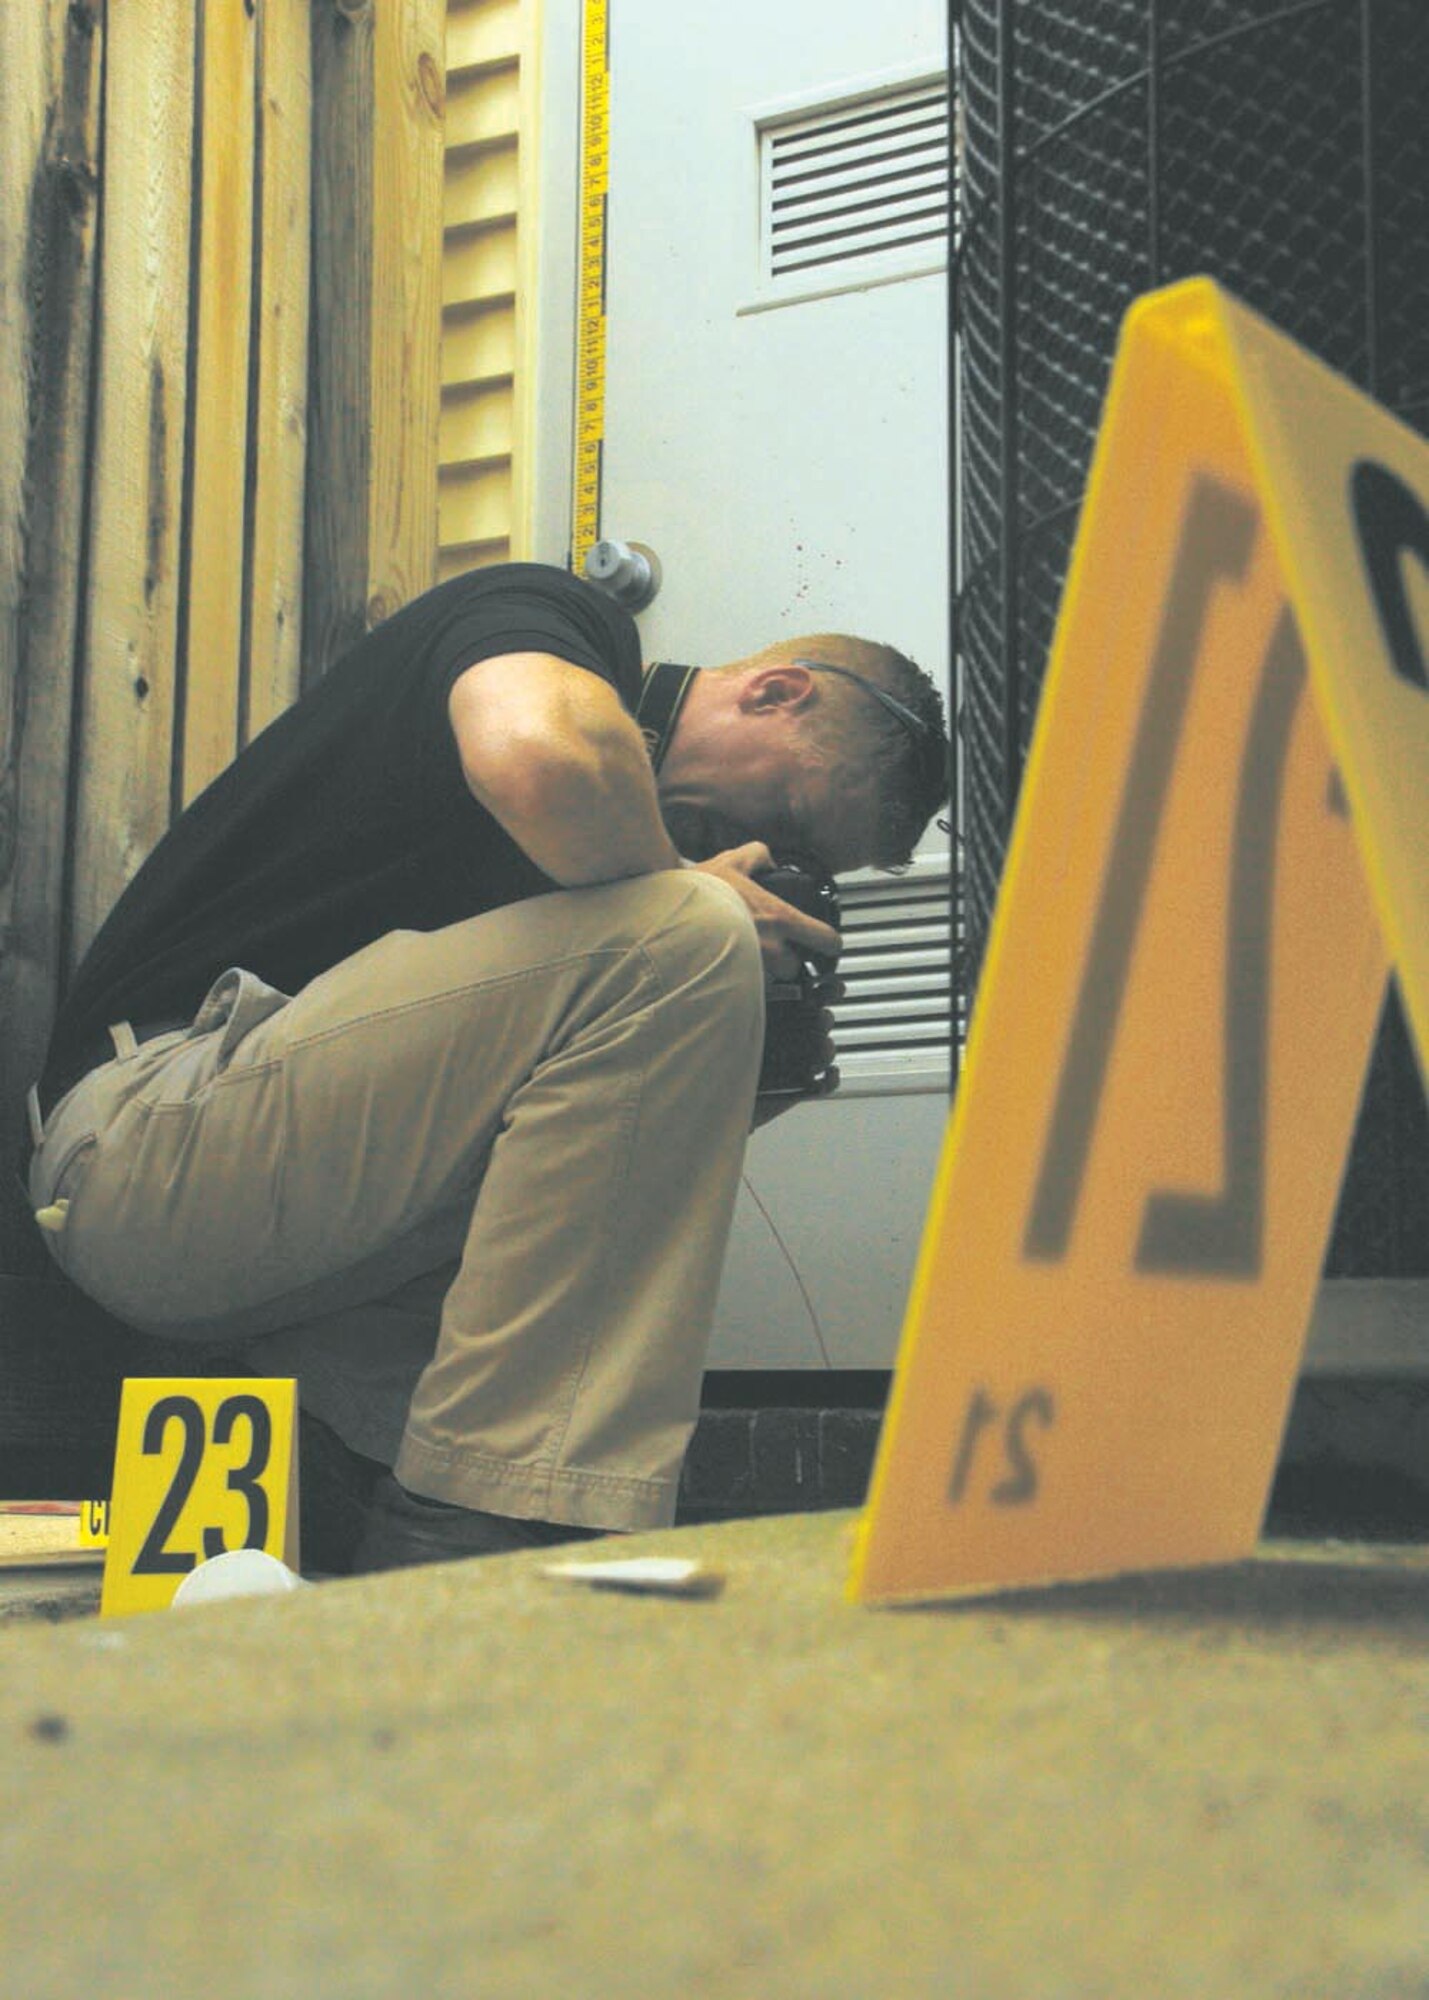 Special Agent Bryan Schmelzer, Forensic Science Consultant, 2nd Field Investigations Squadron, Air Force Office of Special Investigations Region 7, photographs evidence during a training scenario. The training scenarios help prepare agents to collect evidence during investigations. (U.S. Air Force photo/Airman 1st Class Melissa Rodrigues) 